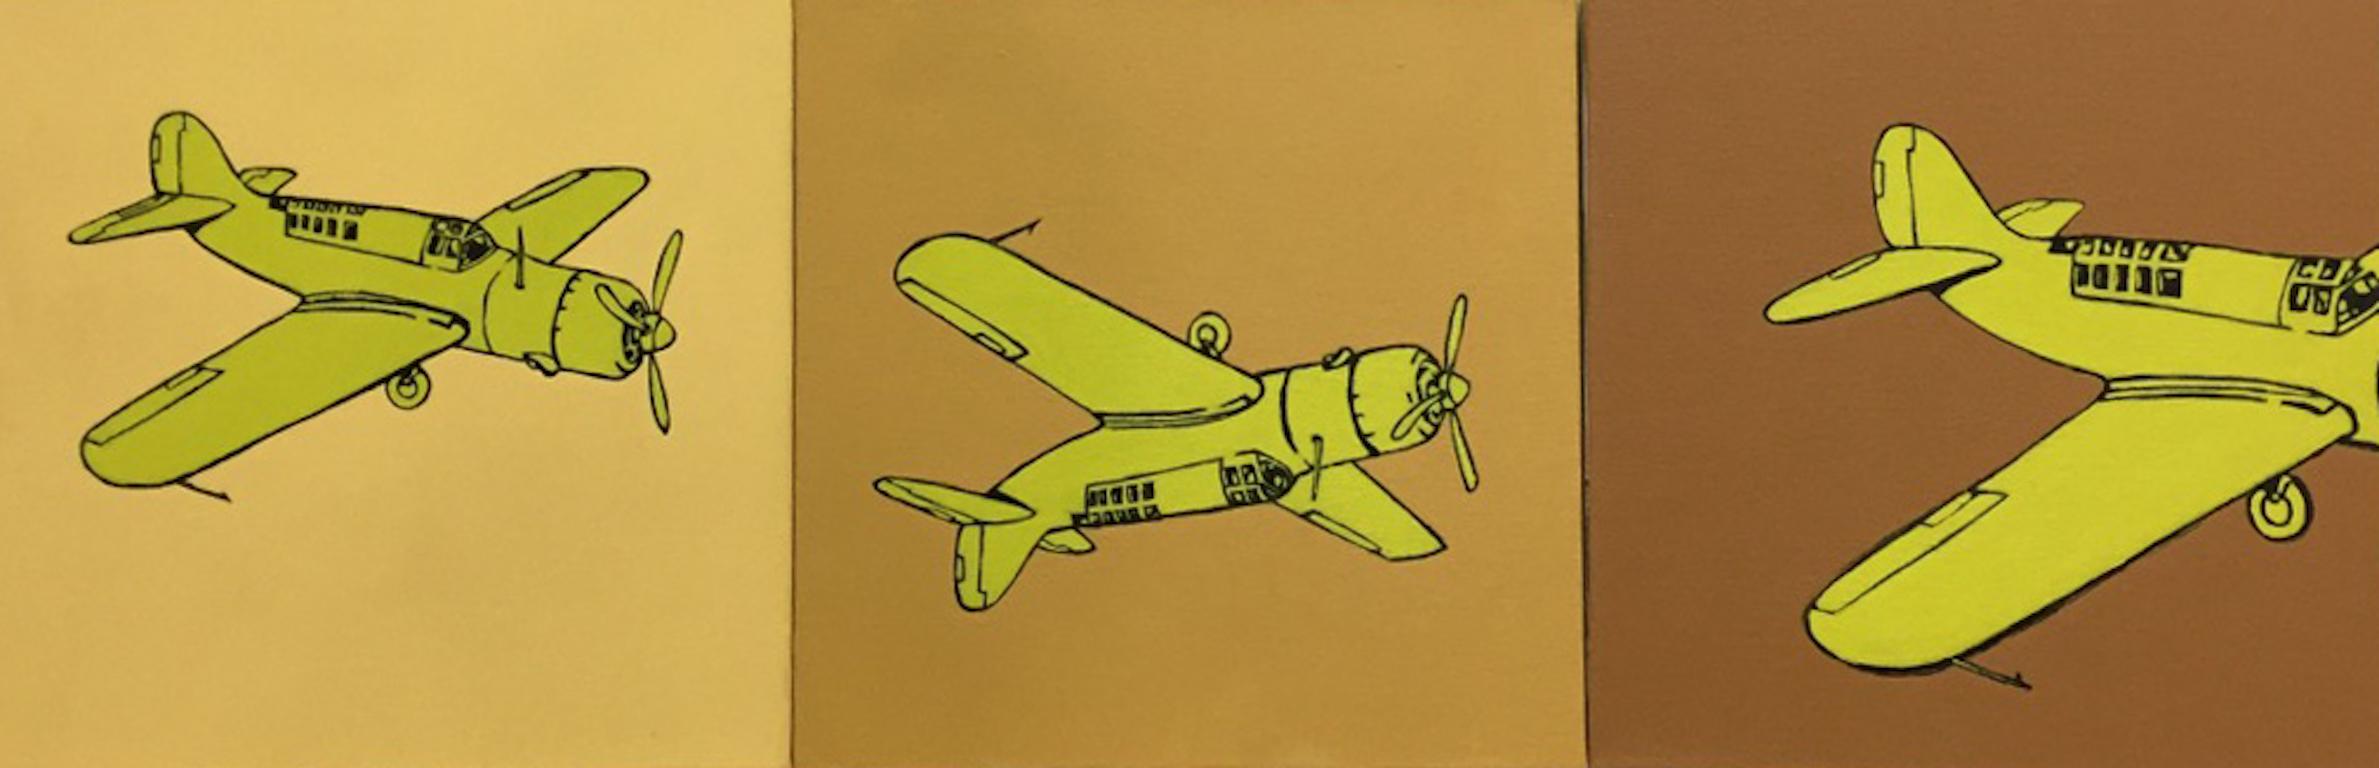 Charles Buckley Still-Life Painting - Airplane, yellow triptych, pop art style